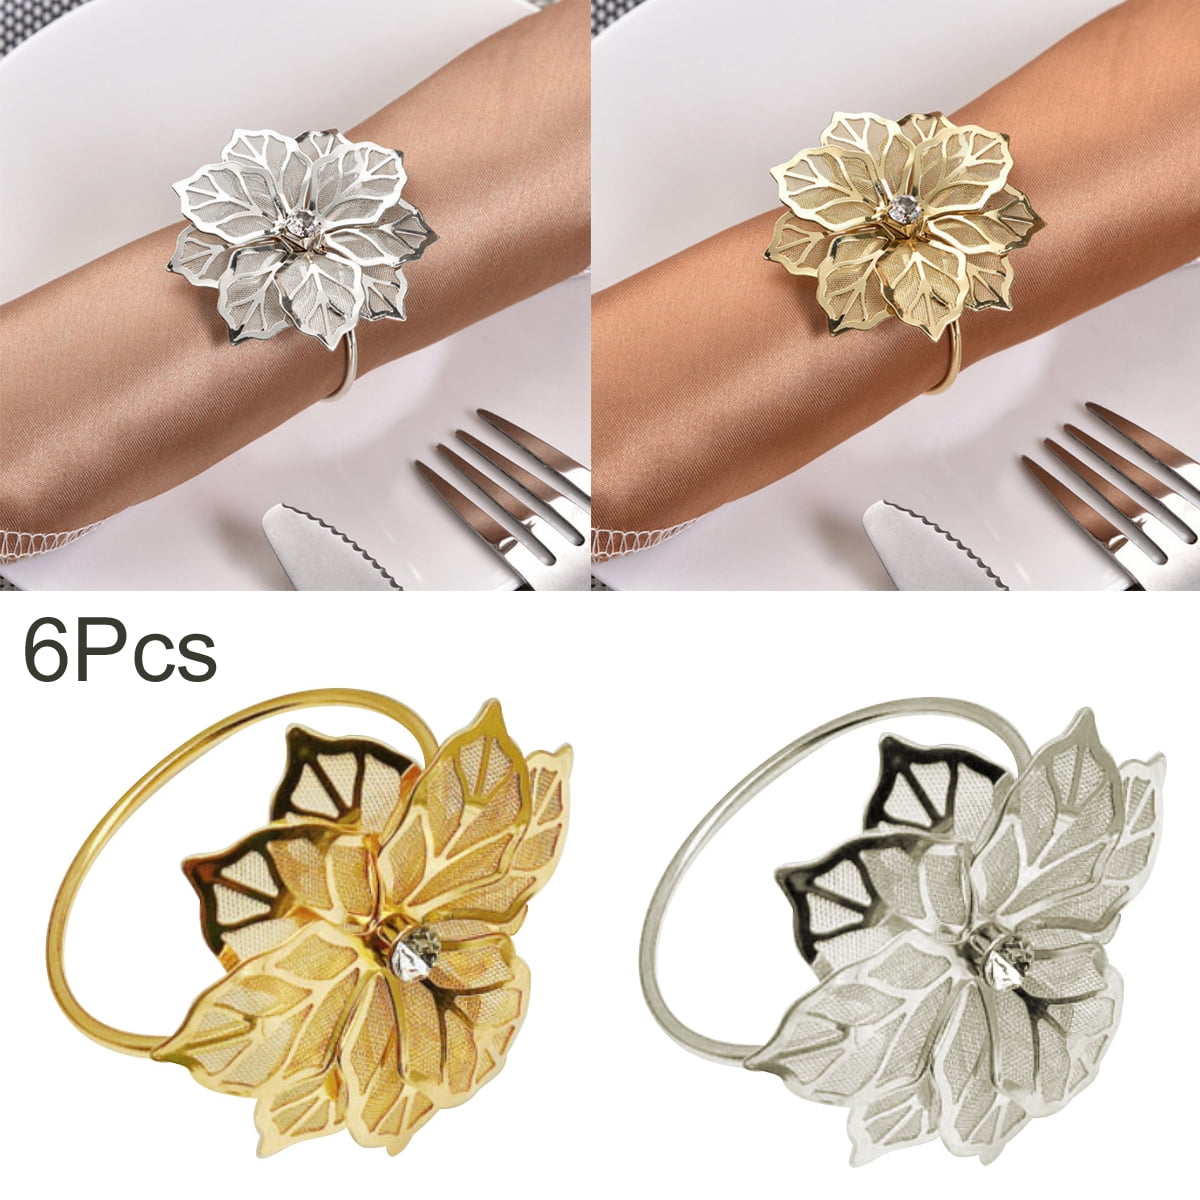 6Pcs Christmas Napkin Rings Pearl Napkin Holders Napkin Buckle Gift for Holiday Dinners Parties Wedding Adornment Table Decoration Accessories Golden